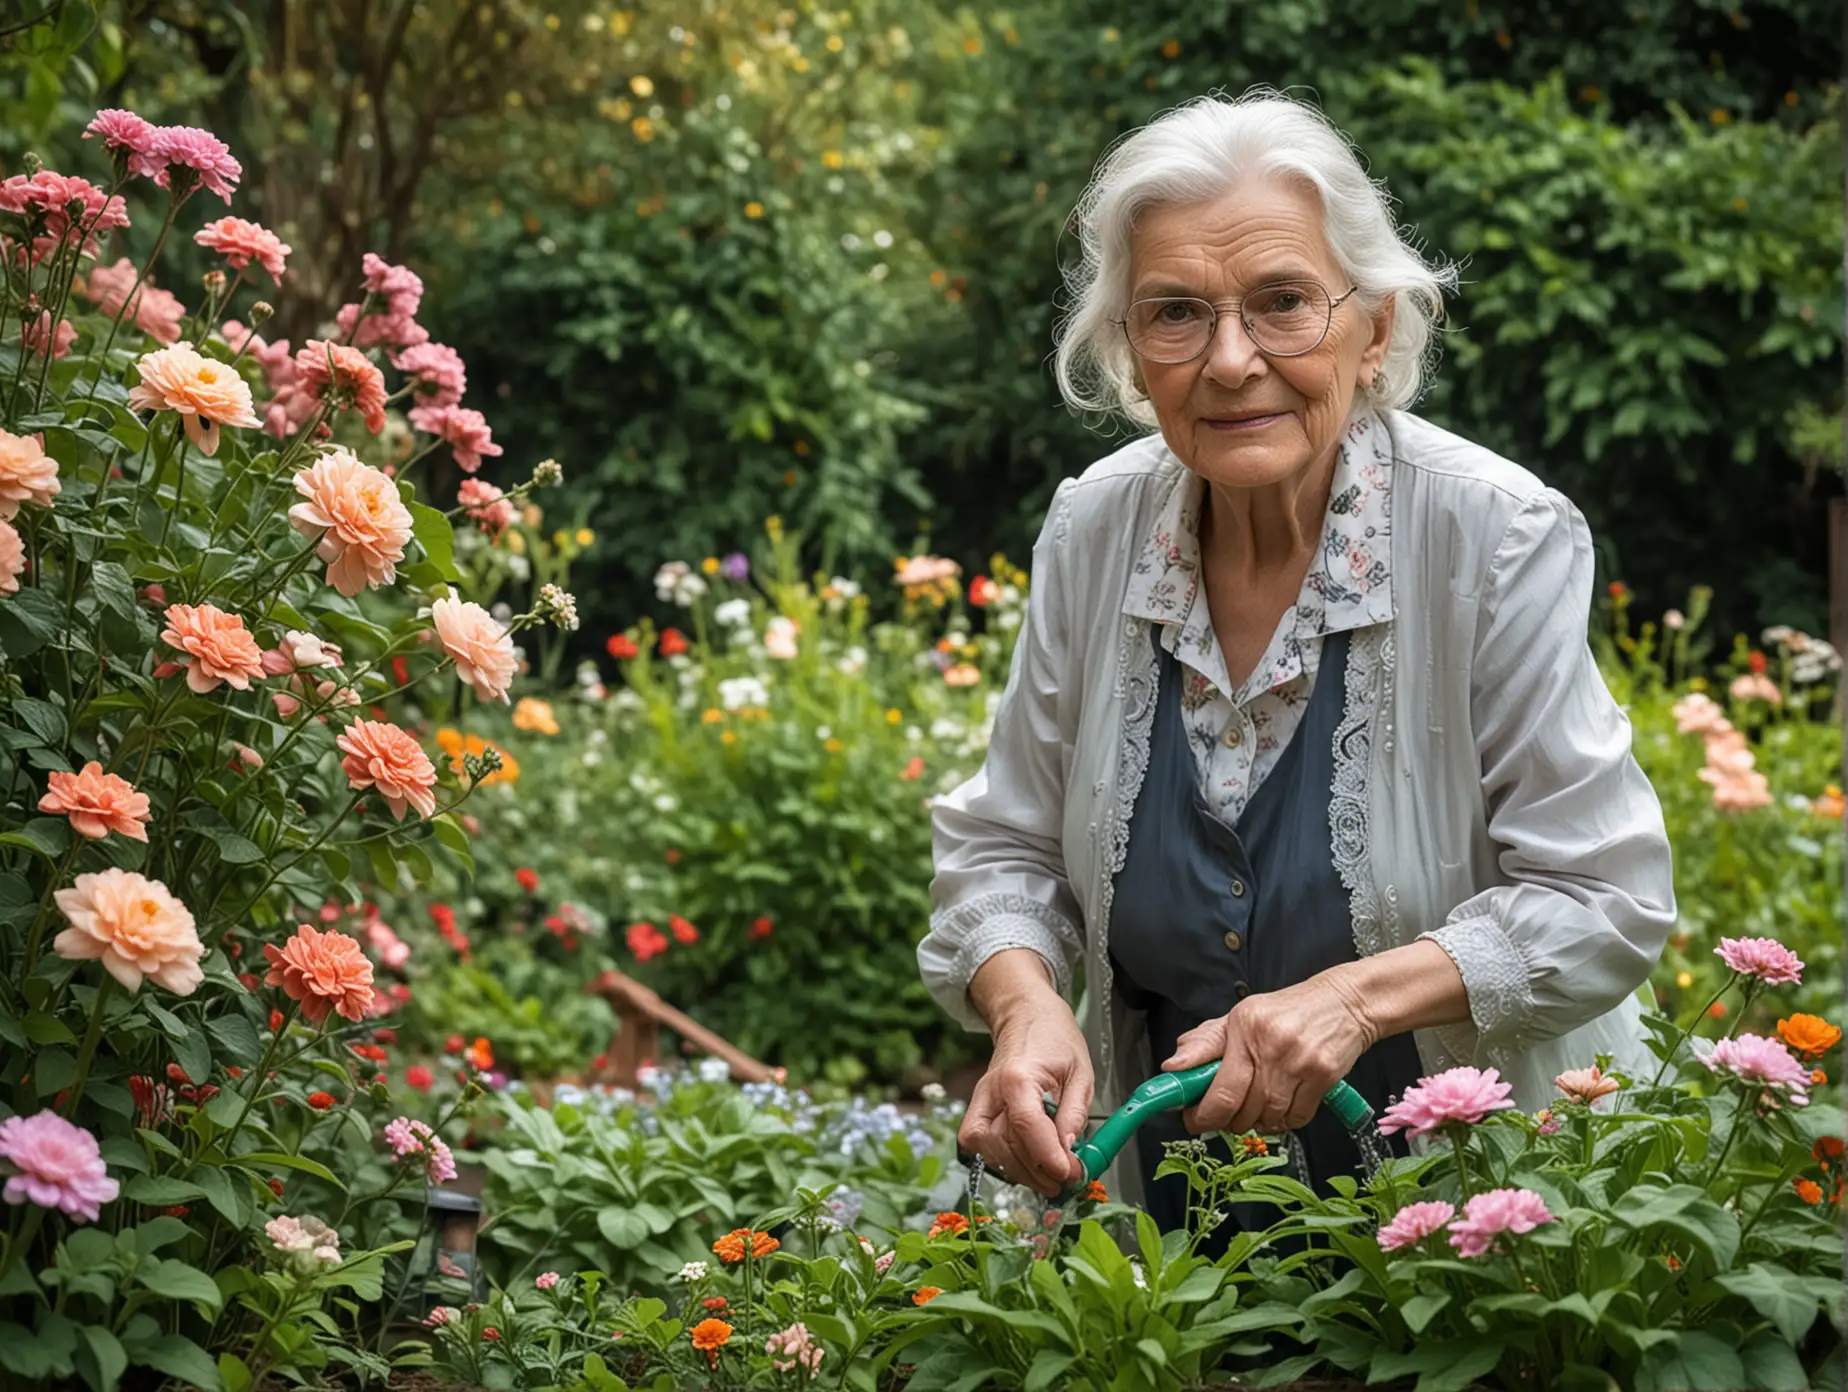 An old lady about 70 years old, watering flowers in the garden, dressed elegantly and elegantly, facing the camera, with exquisite facial features and professional photography skills